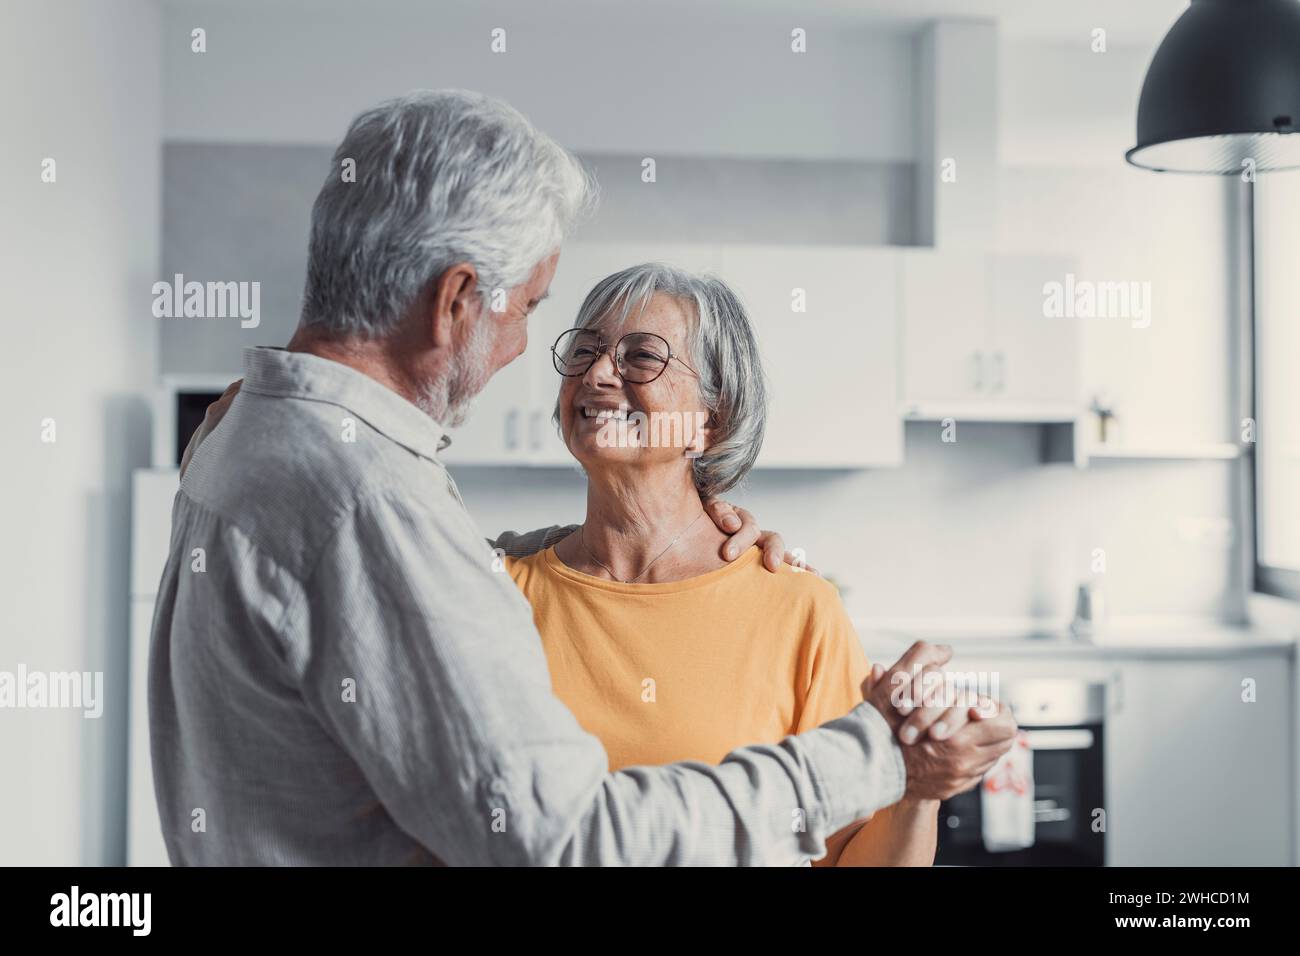 Joyful active old retired romantic couple dancing laughing in living room, happy middle aged wife and elder husband having fun at home, smiling senior family grandparents relaxing bonding together Stock Photo